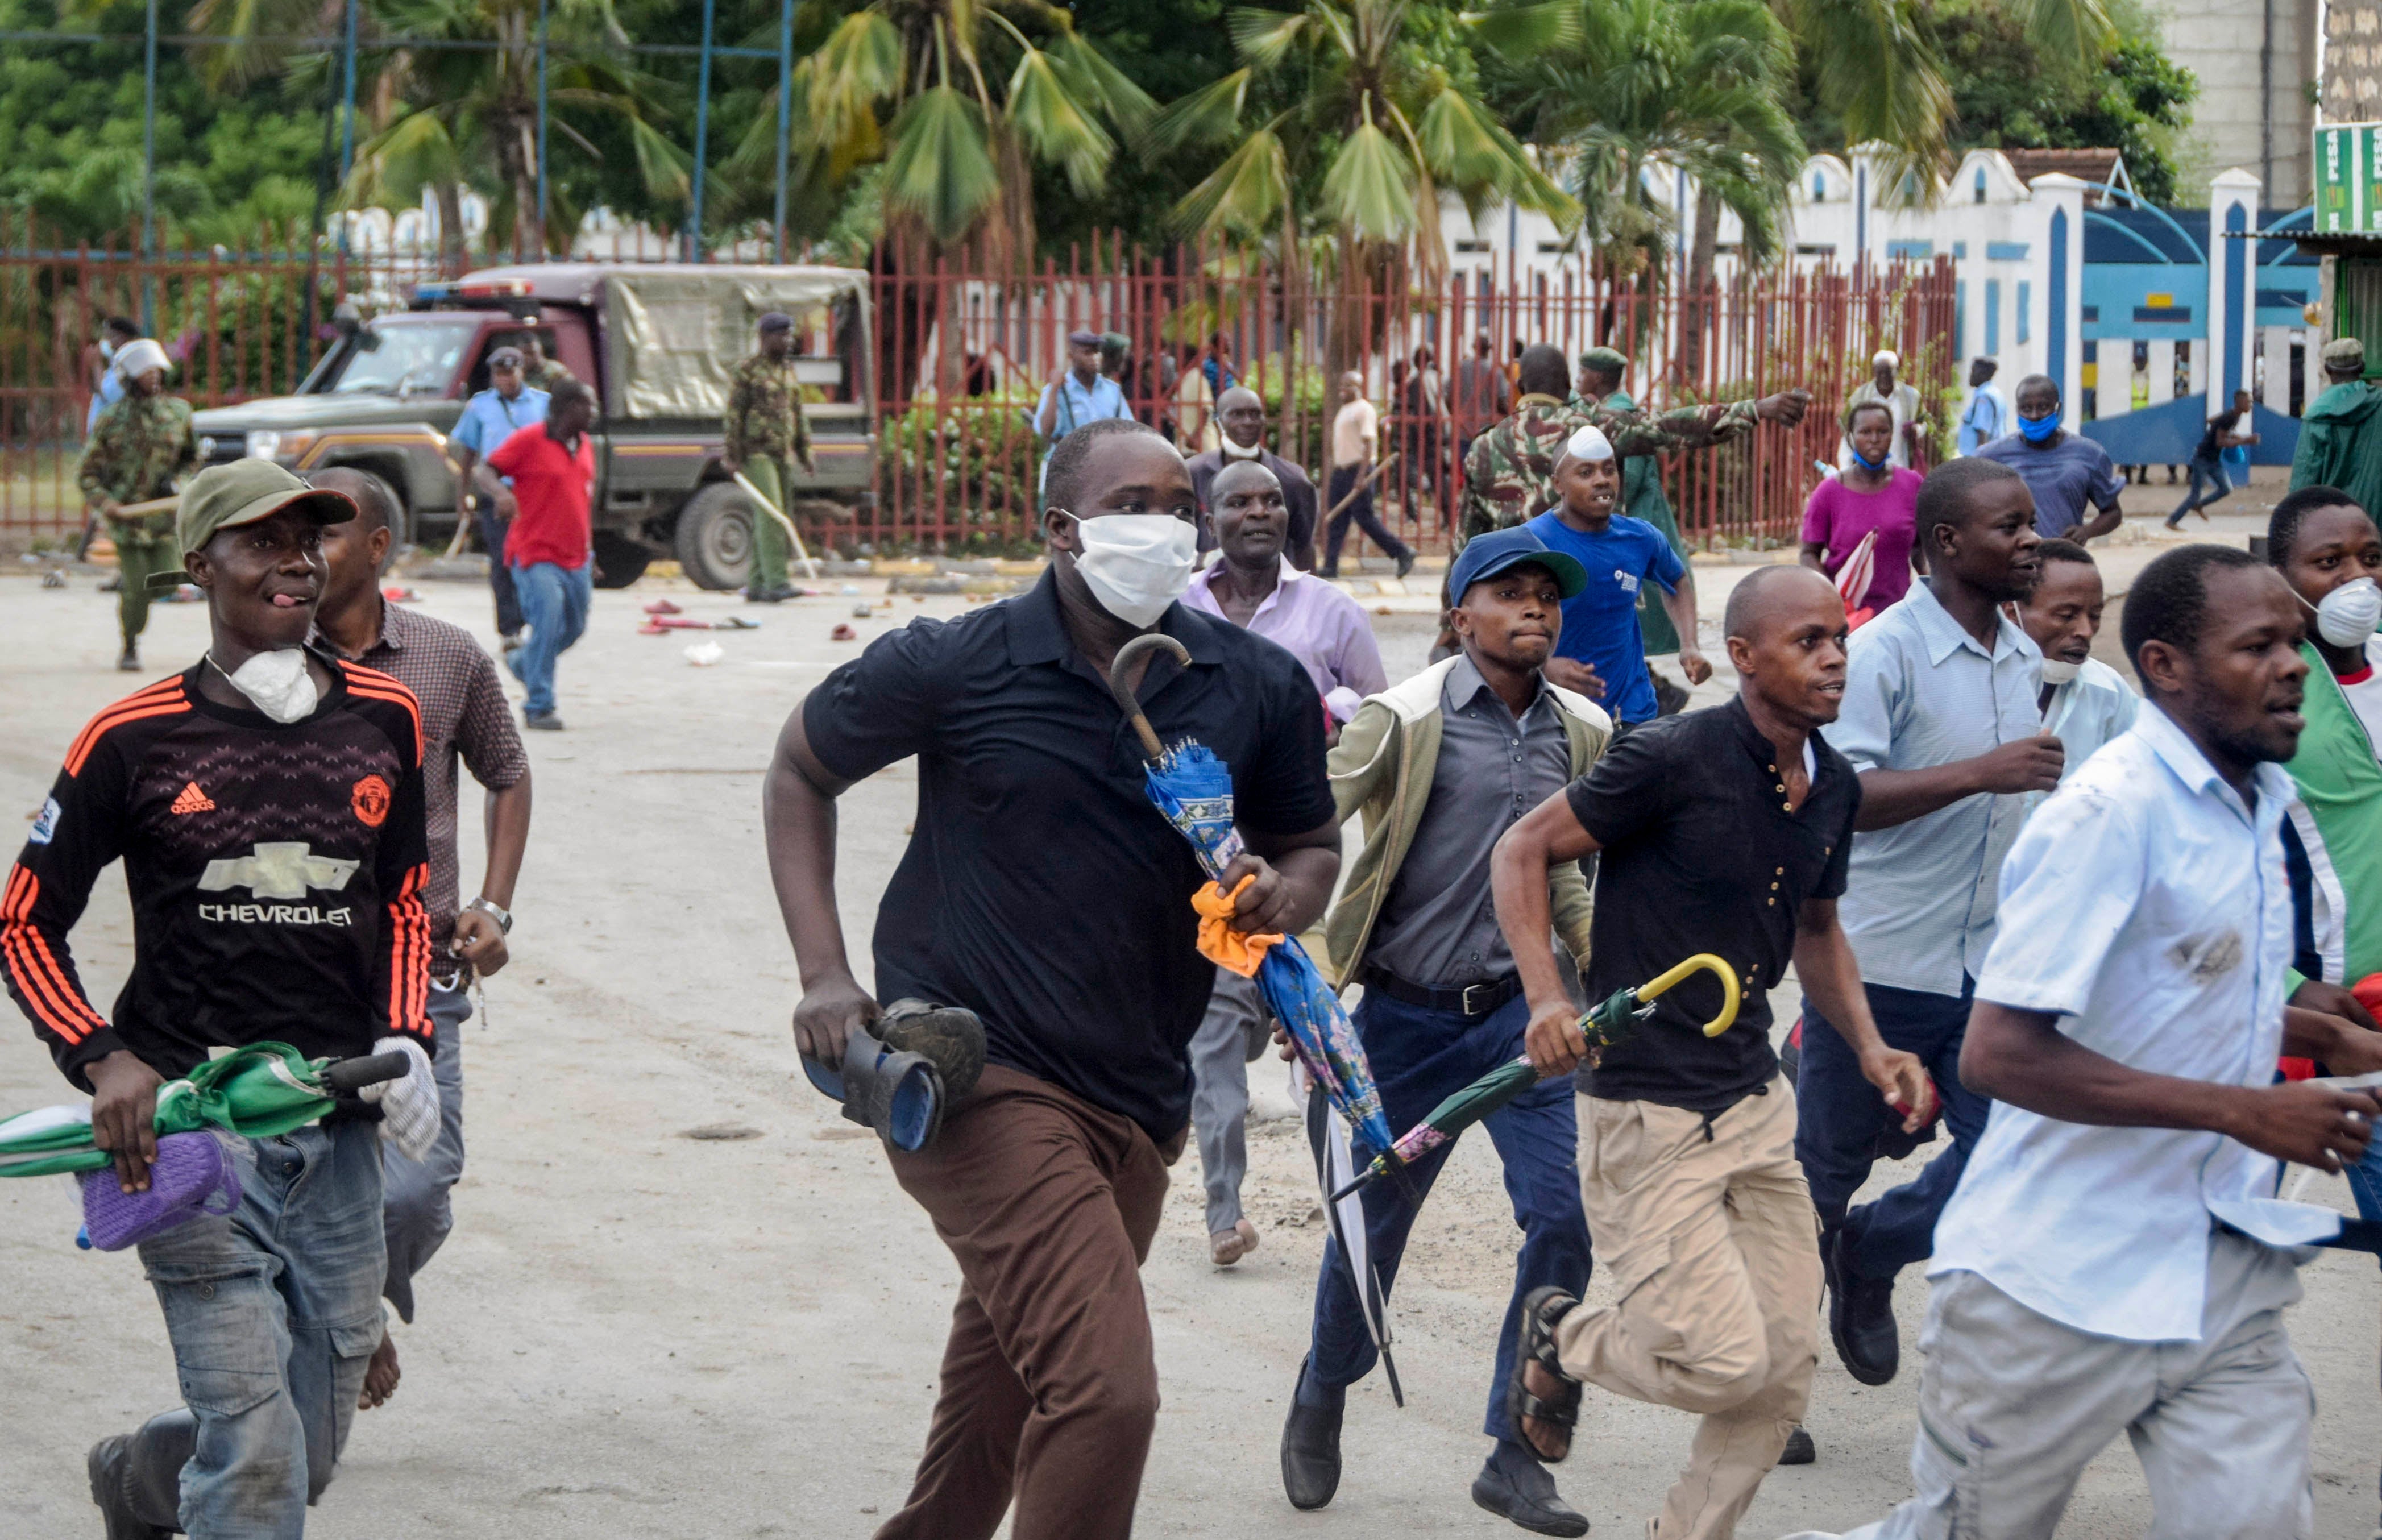 Ferry passengers flee from police firing tear gas, after new measures aimed at halting the spread of the new coronavirus instead caused a crowd to form outside the ferry in Mombasa, Kenya Friday, March 27, 2020. 